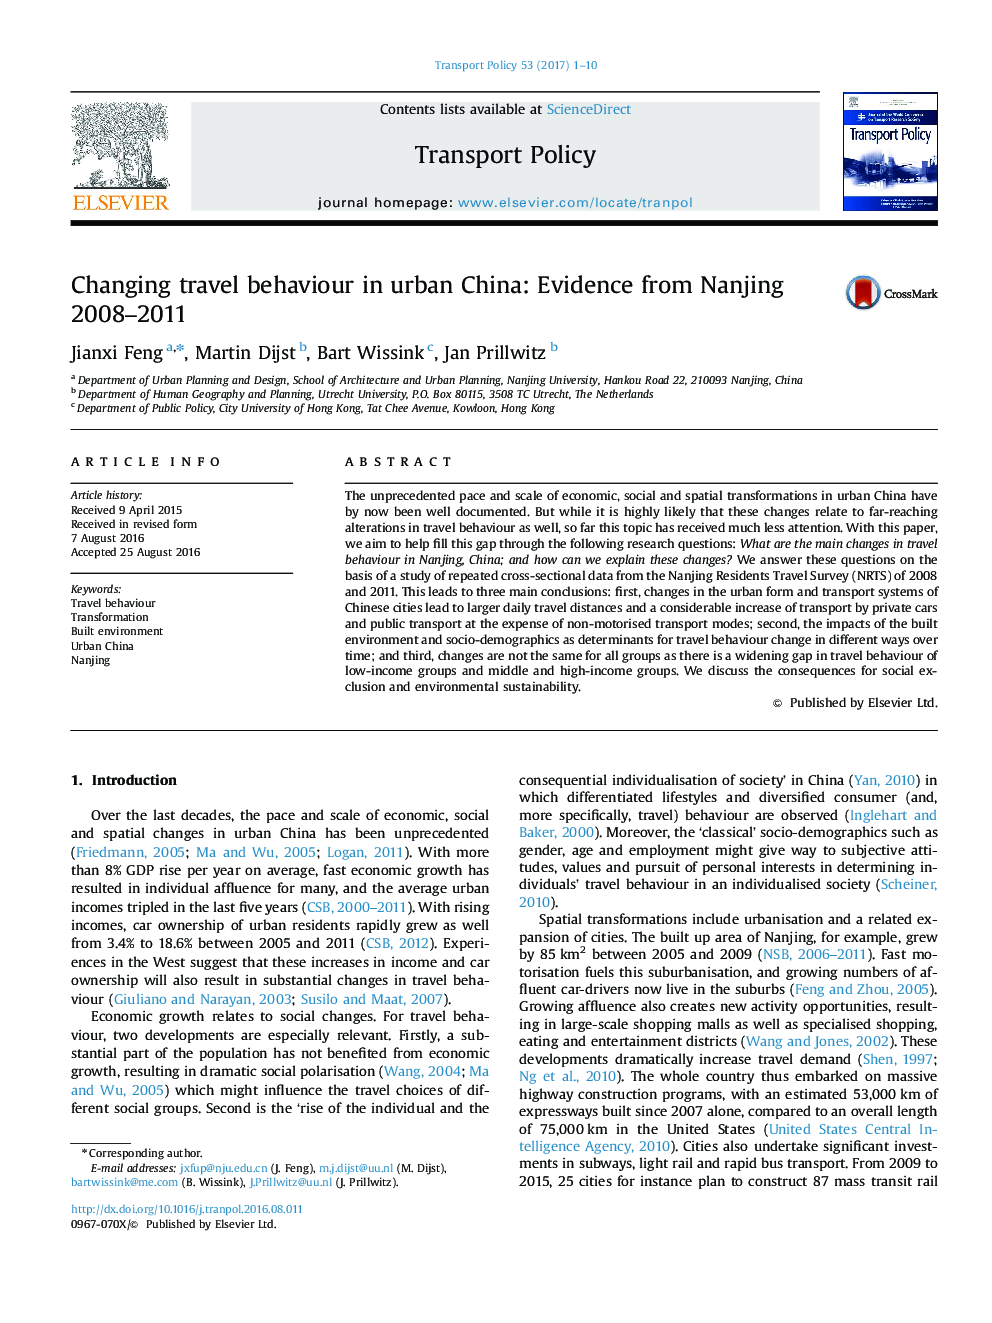 Changing travel behaviour in urban China: Evidence from Nanjing 2008–2011